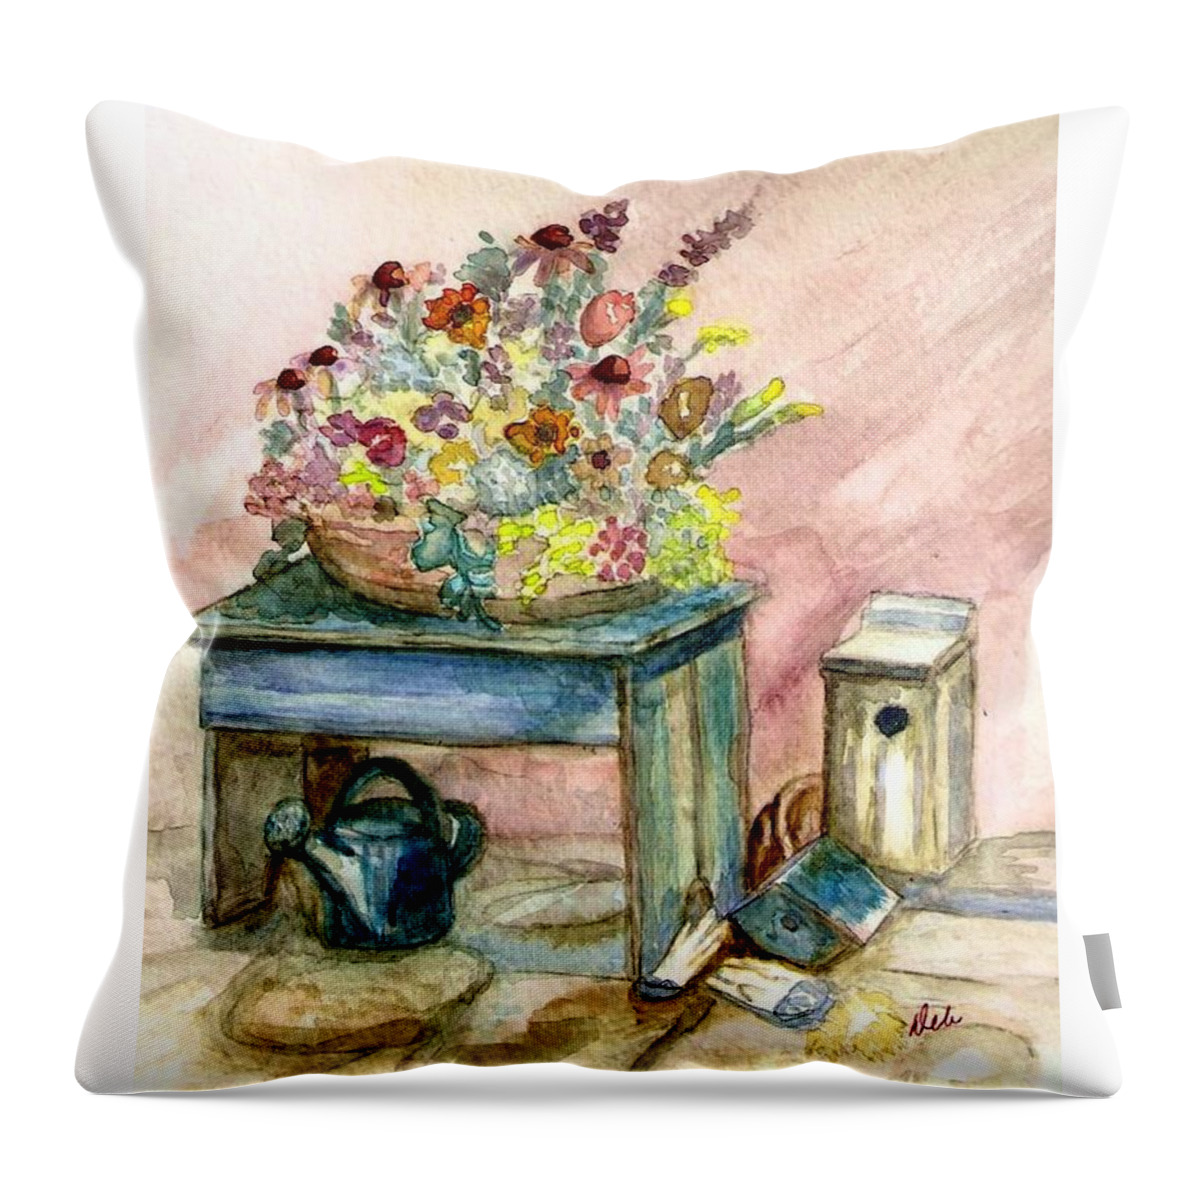 Gardening Throw Pillow featuring the painting Garden Bench by Deb Stroh-Larson